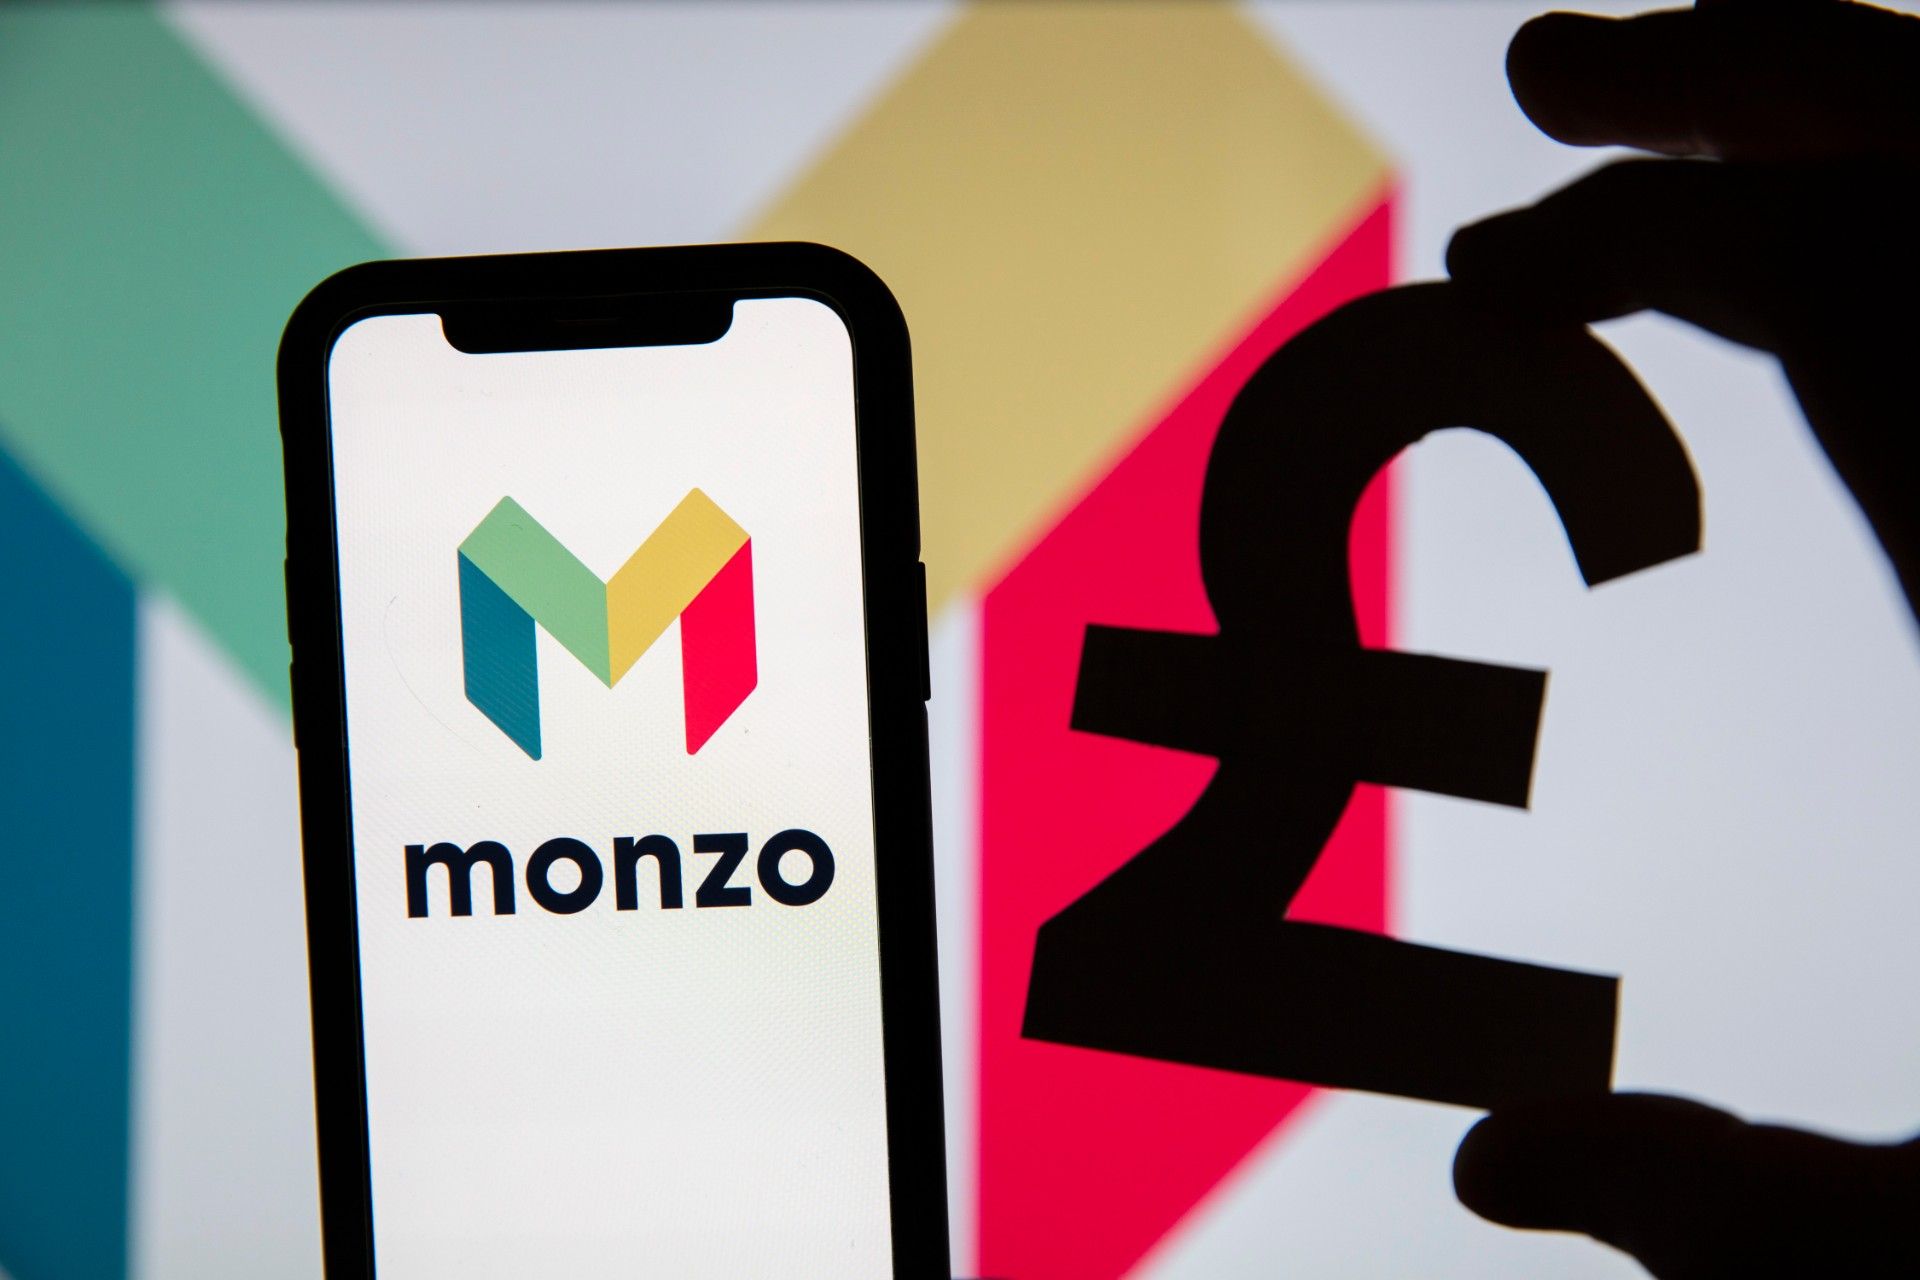 Monzo logo on smartphone and silhouette of a hand holding a pound symbol in front of Monzo background